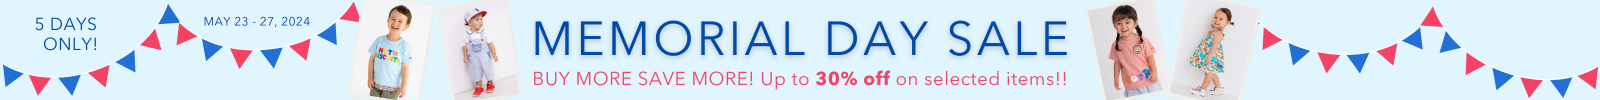 MEMORIAL DAY SALE! 10%OFF$100-, 20%OFF$200-, 30%OFF$300-